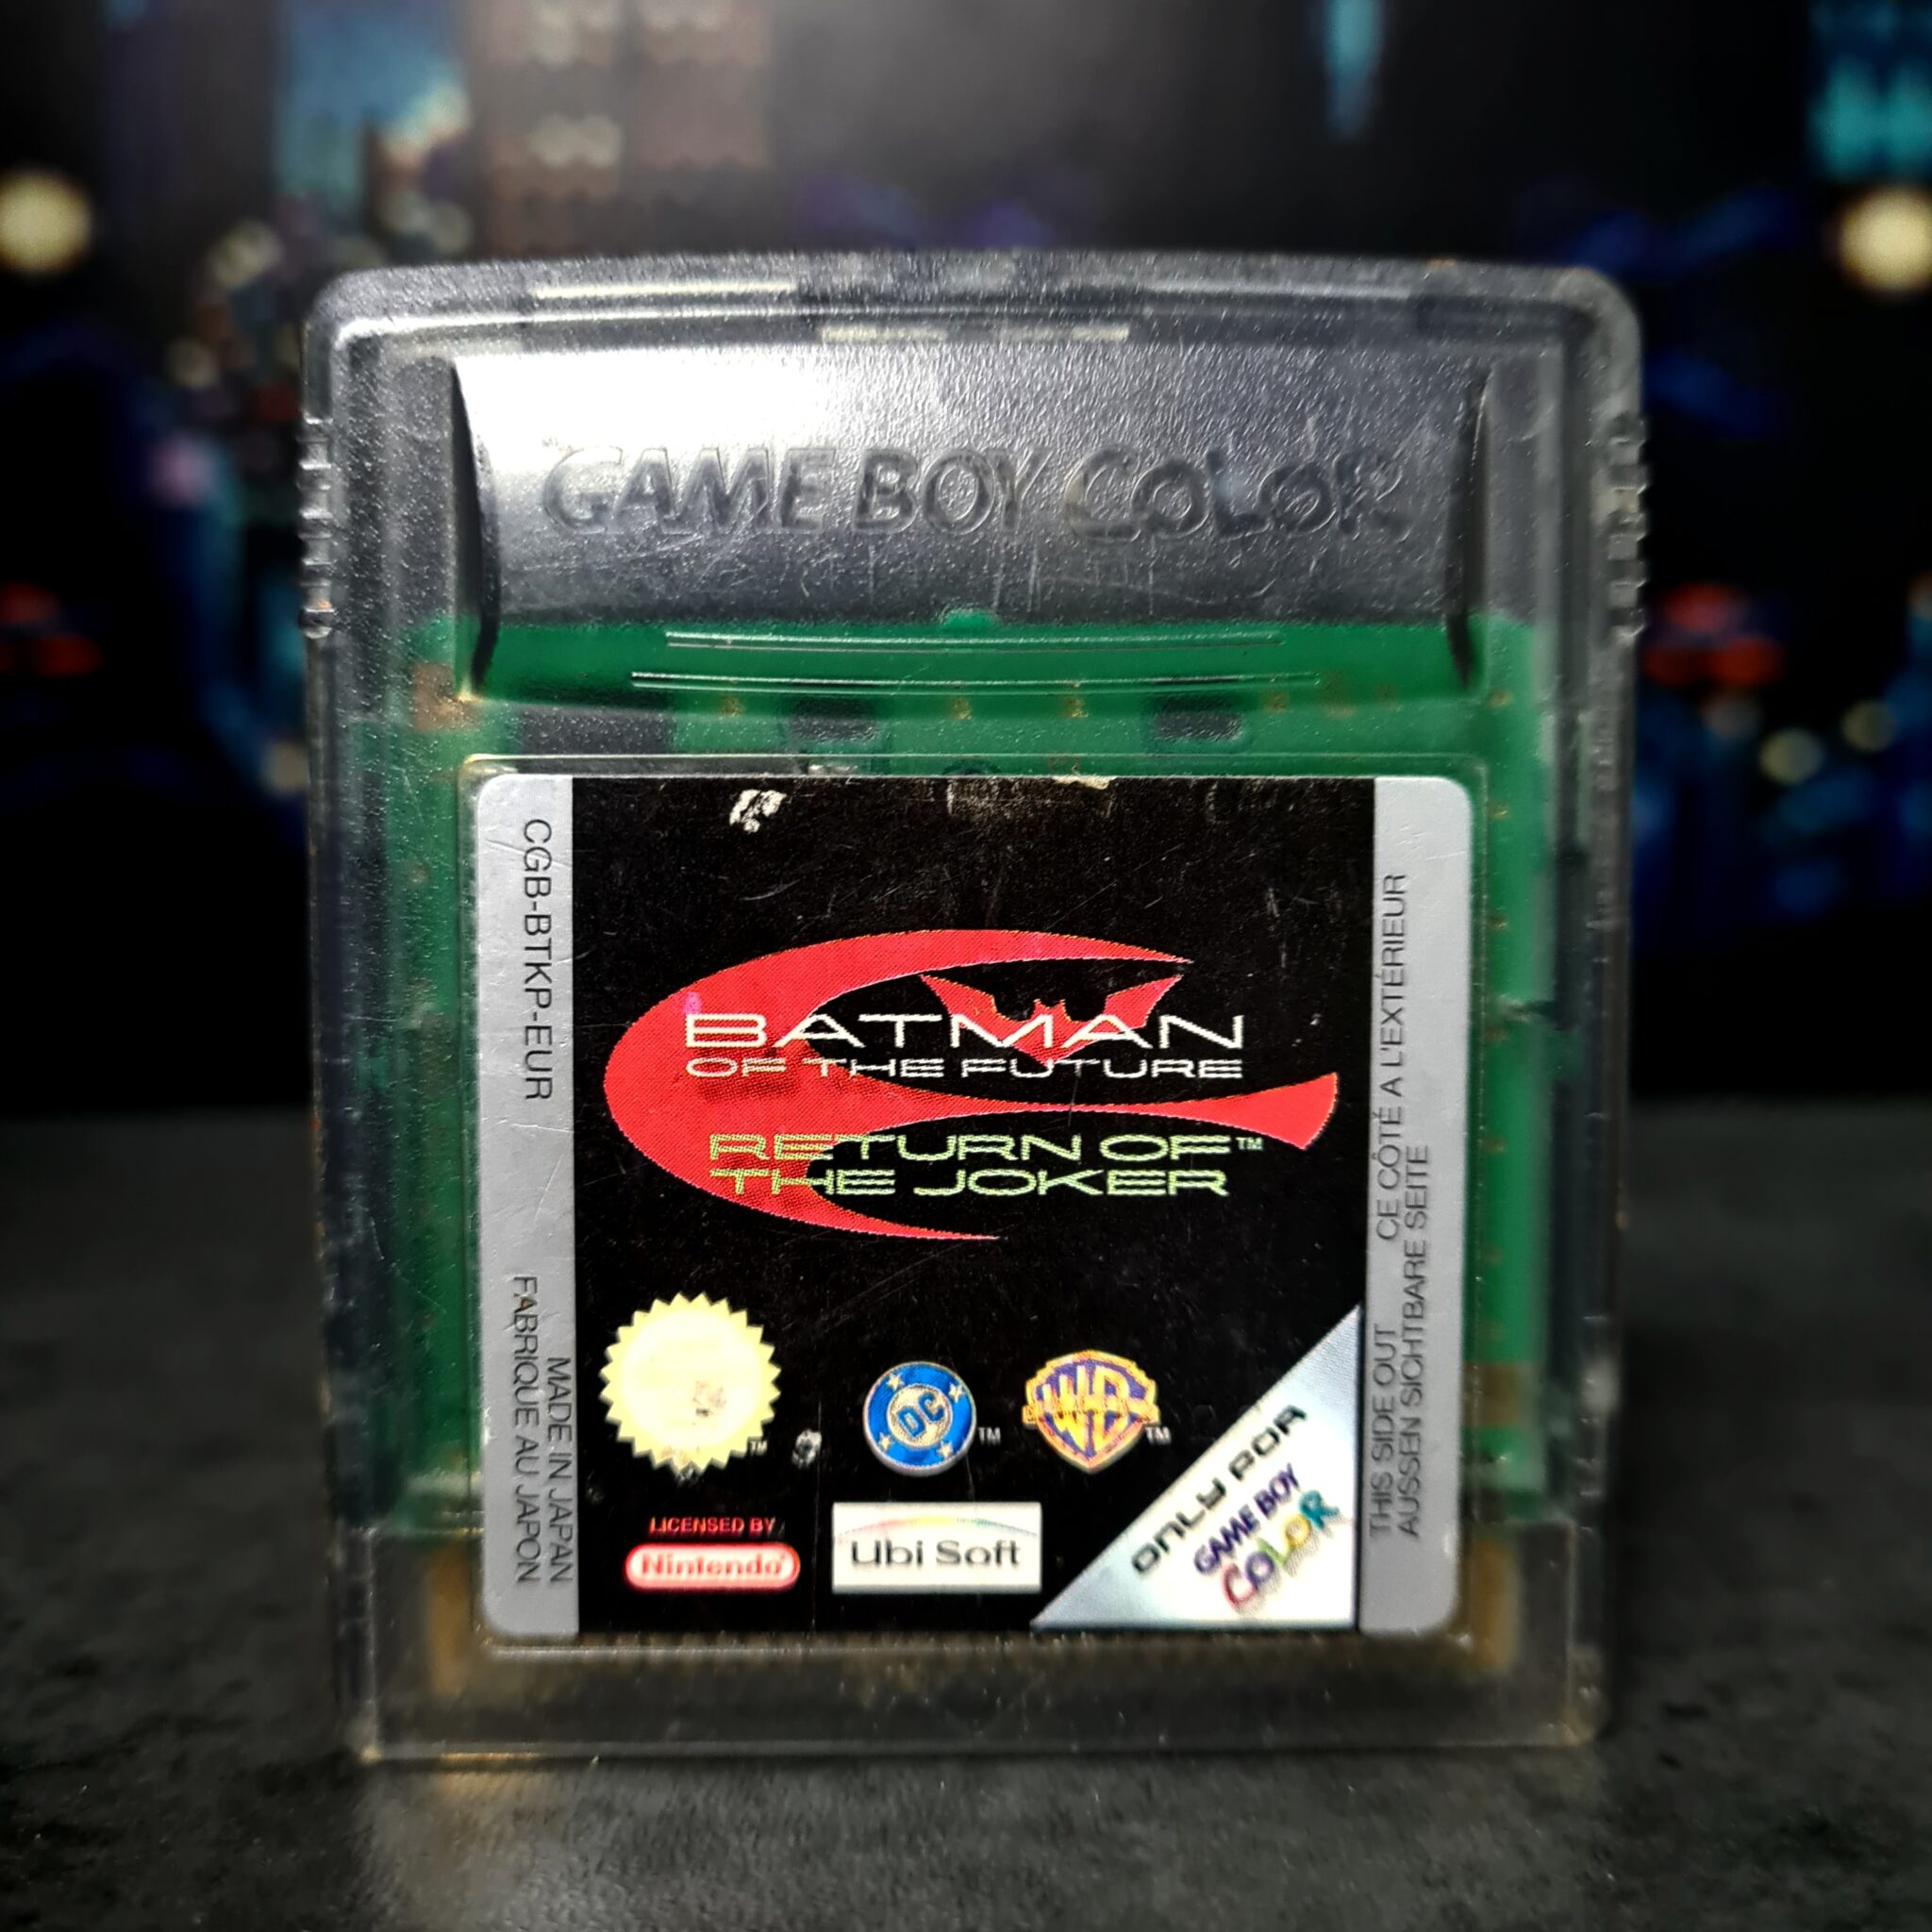 GAME BOY / GAME BOY COLOR Archives - Streets of Cash